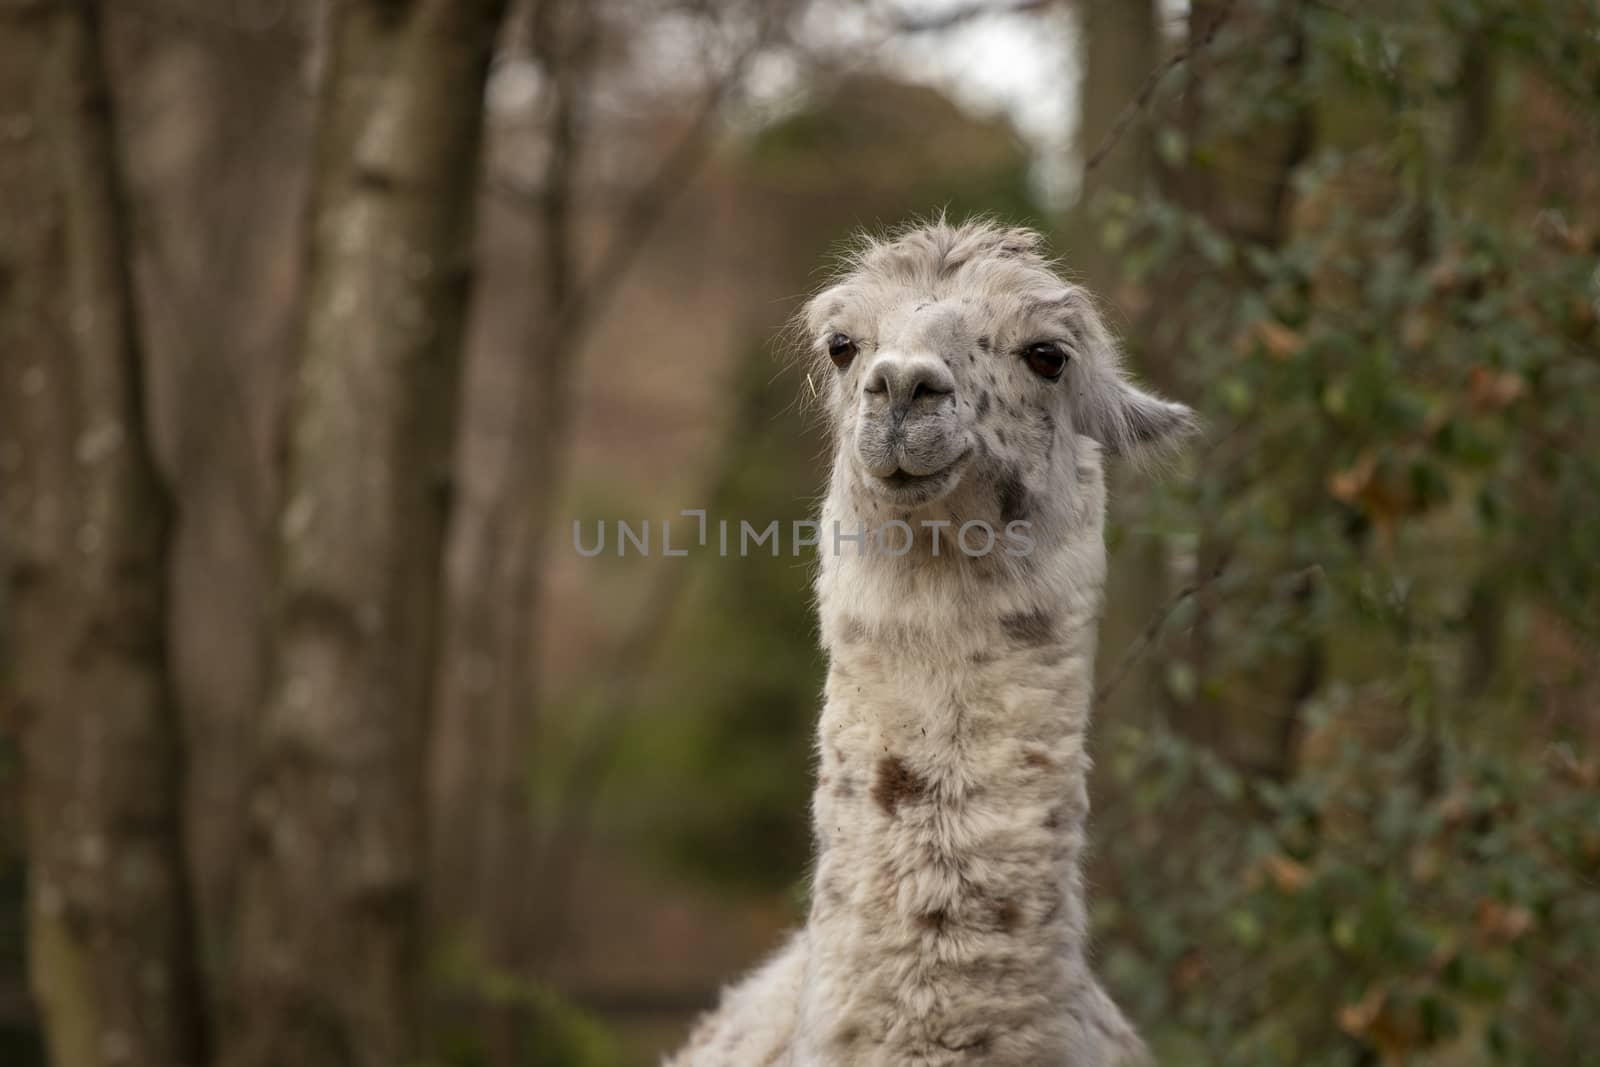 portrait of lama with the funny look. Shot in natural environment in a zoo